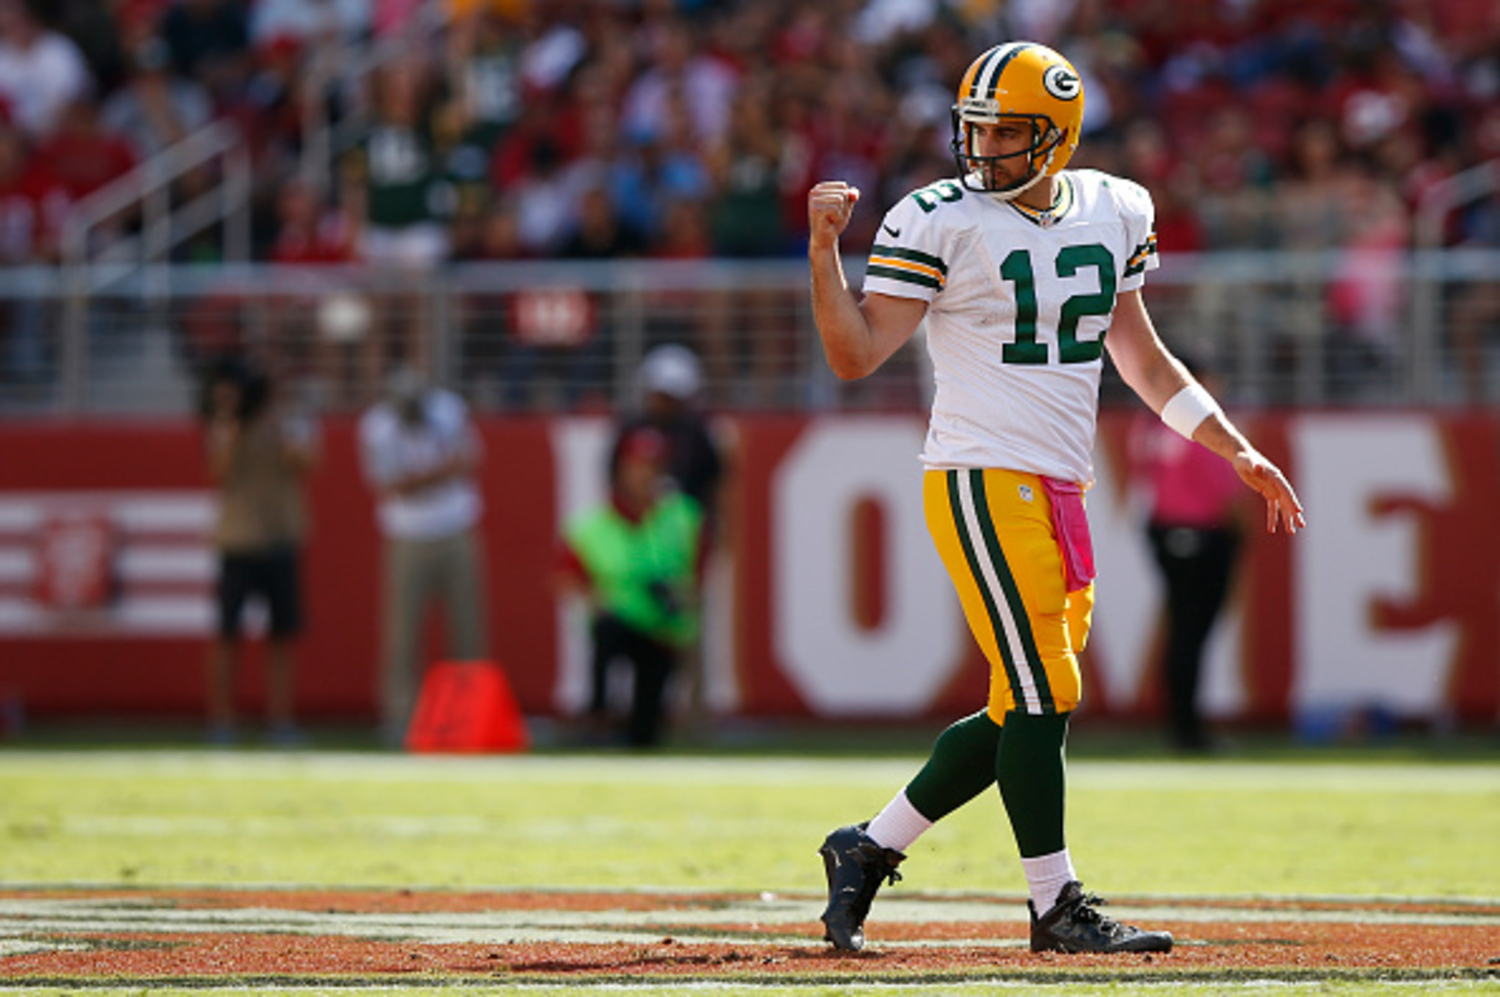 Aaron Rodgers was not a big-time recruit out of high school